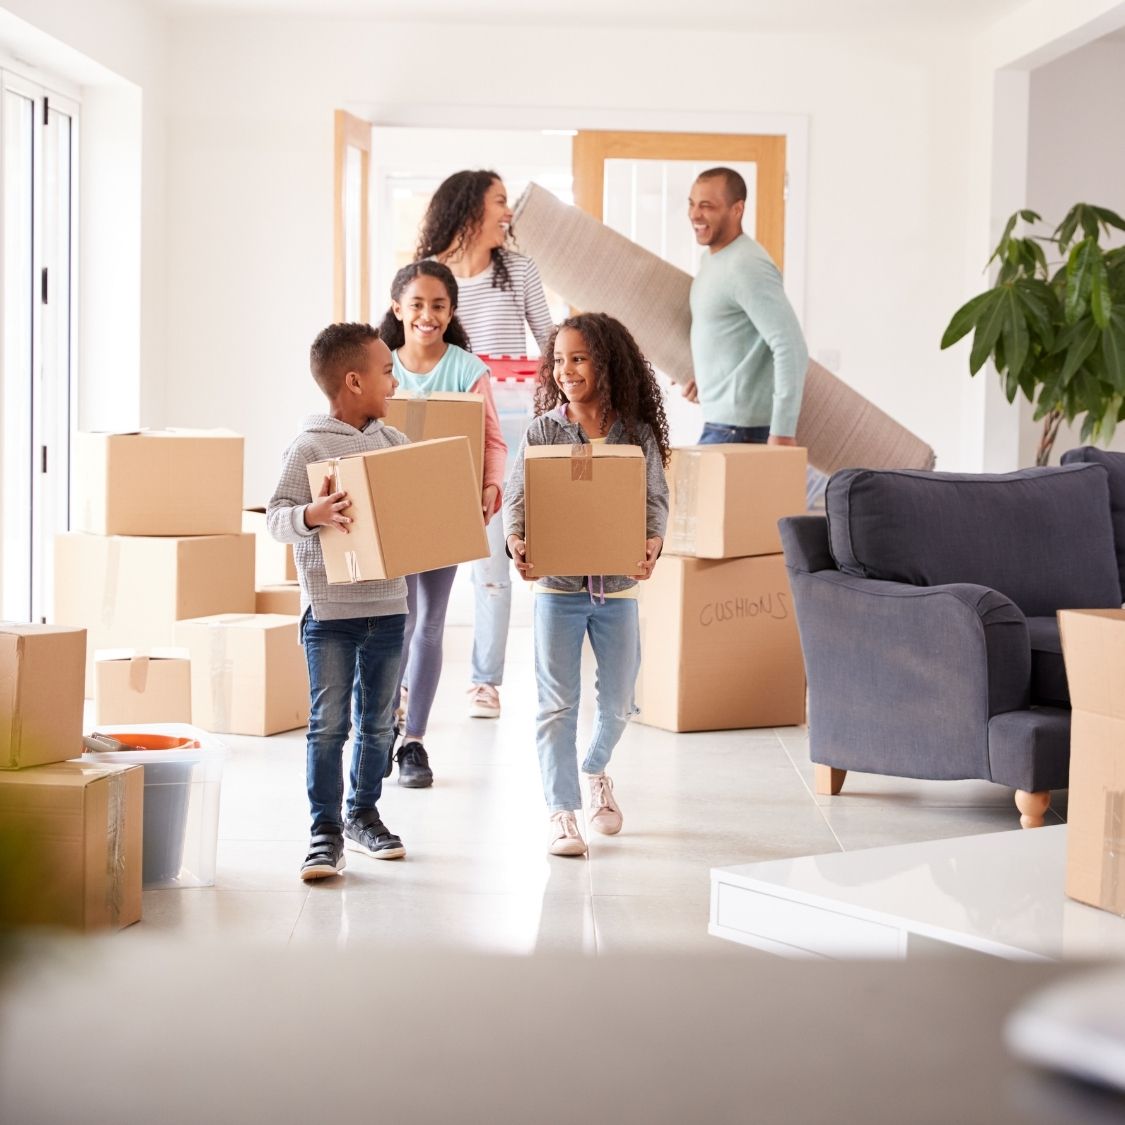 Top Tips for Moving Your Family Across the Country